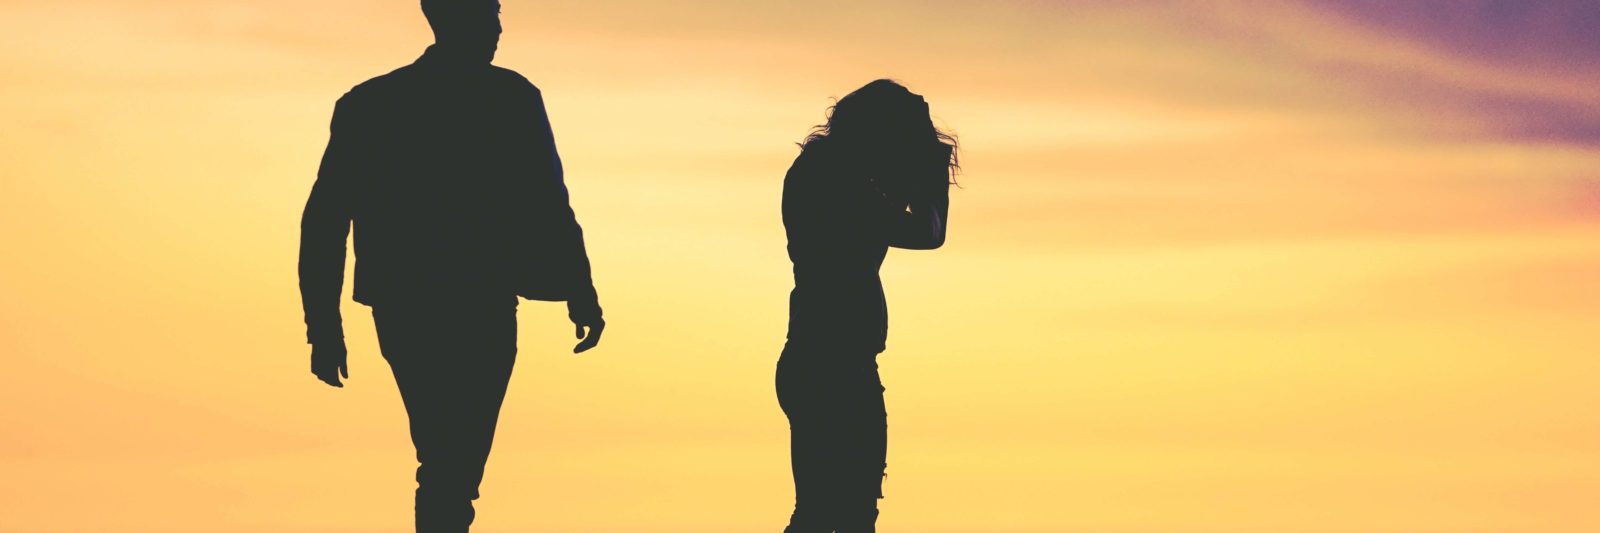 silhouette of man and women against sunset background